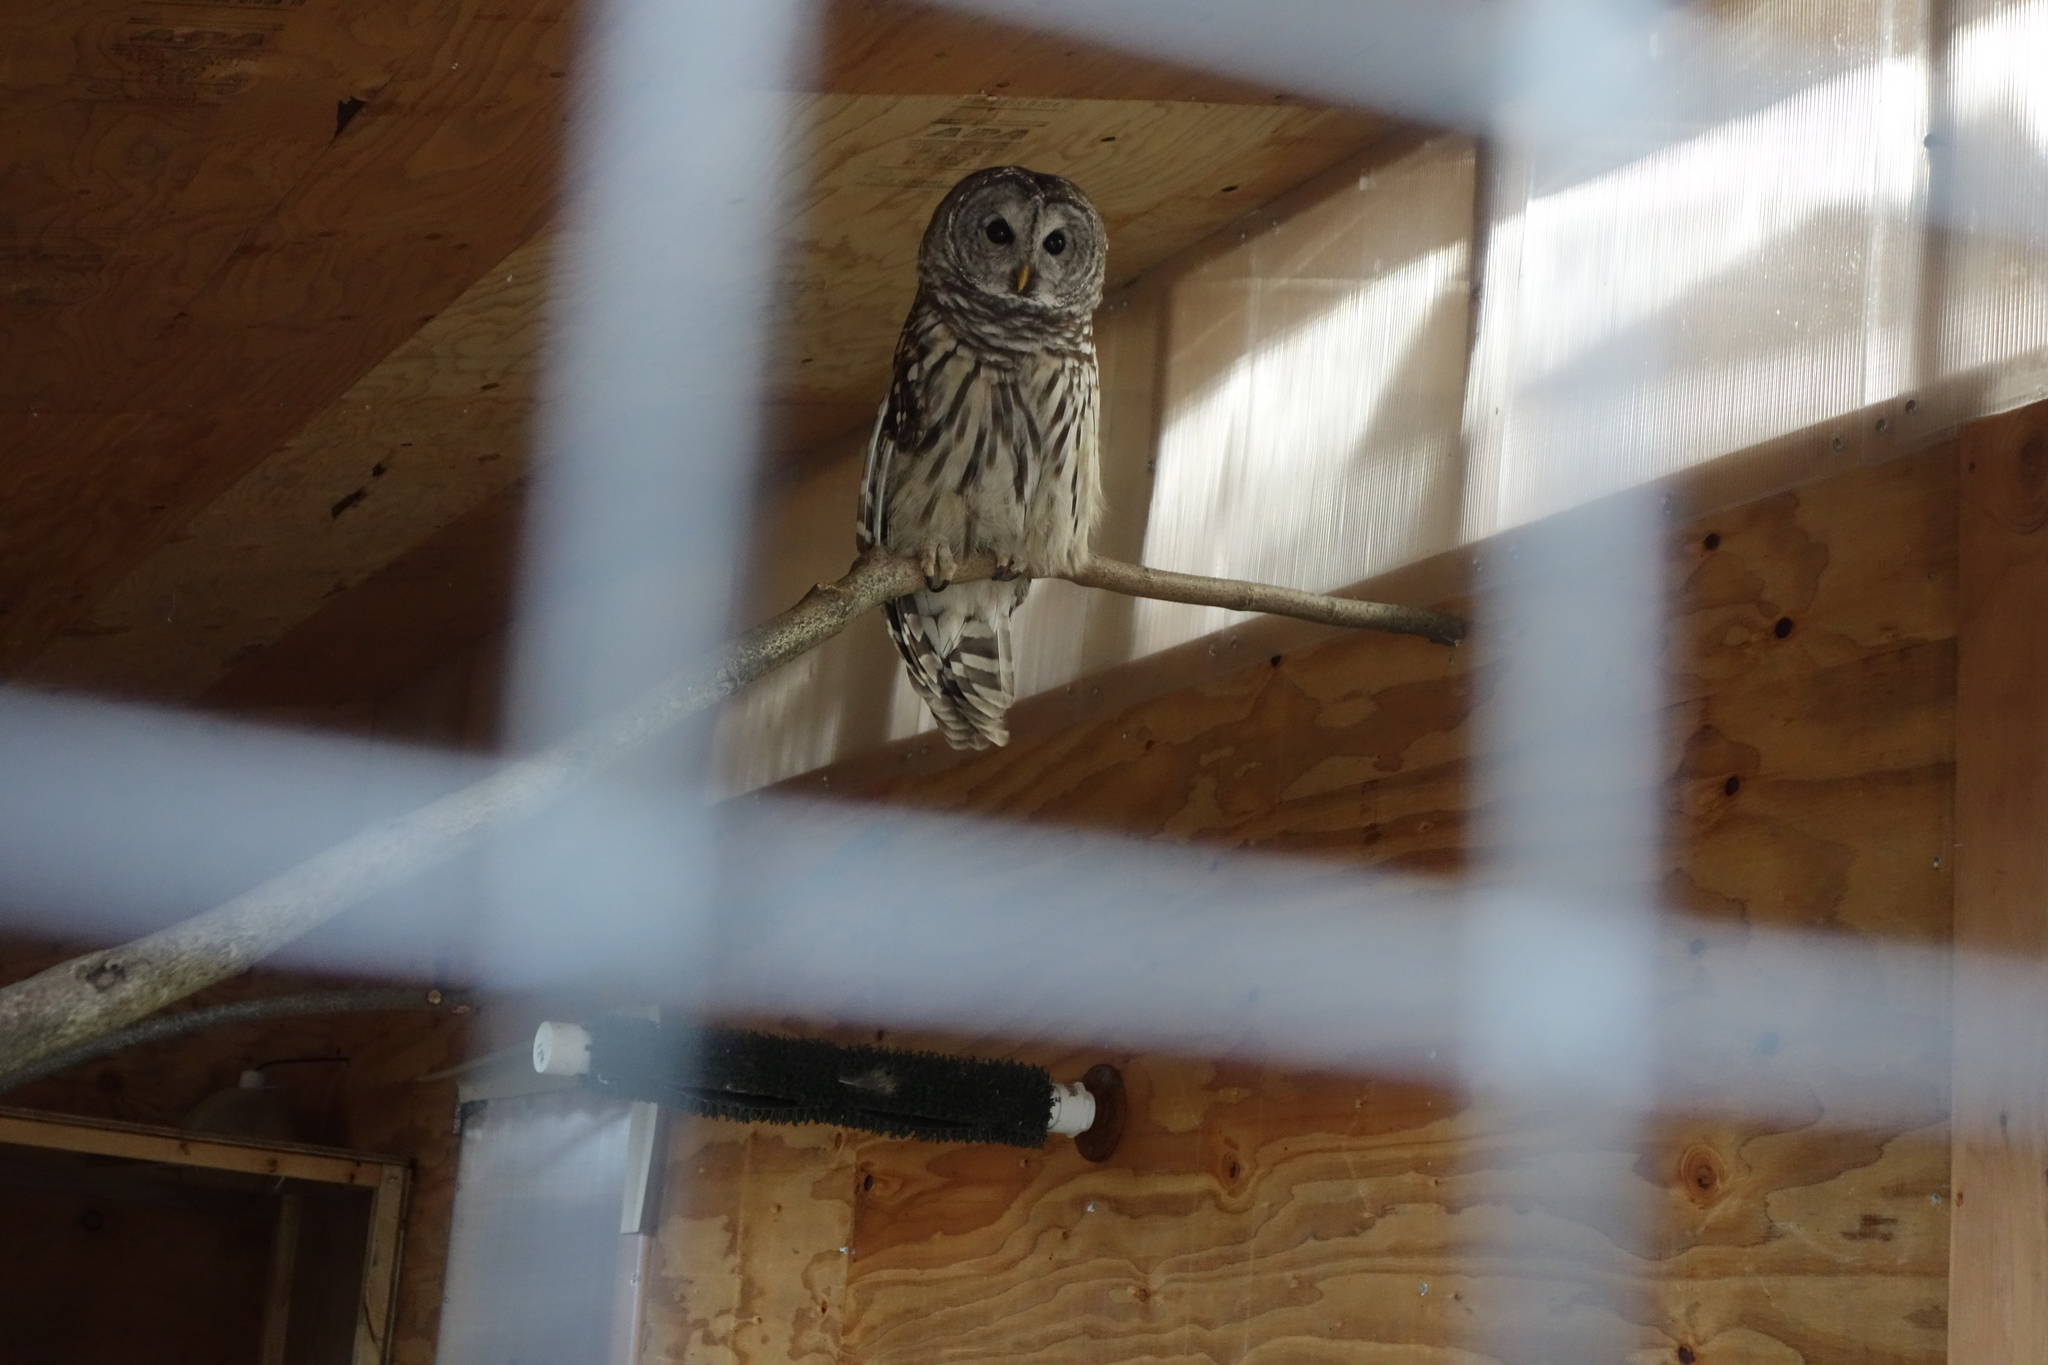 Hunter, the barred owl, from inside his enclosure. Photo by Clara Miller.